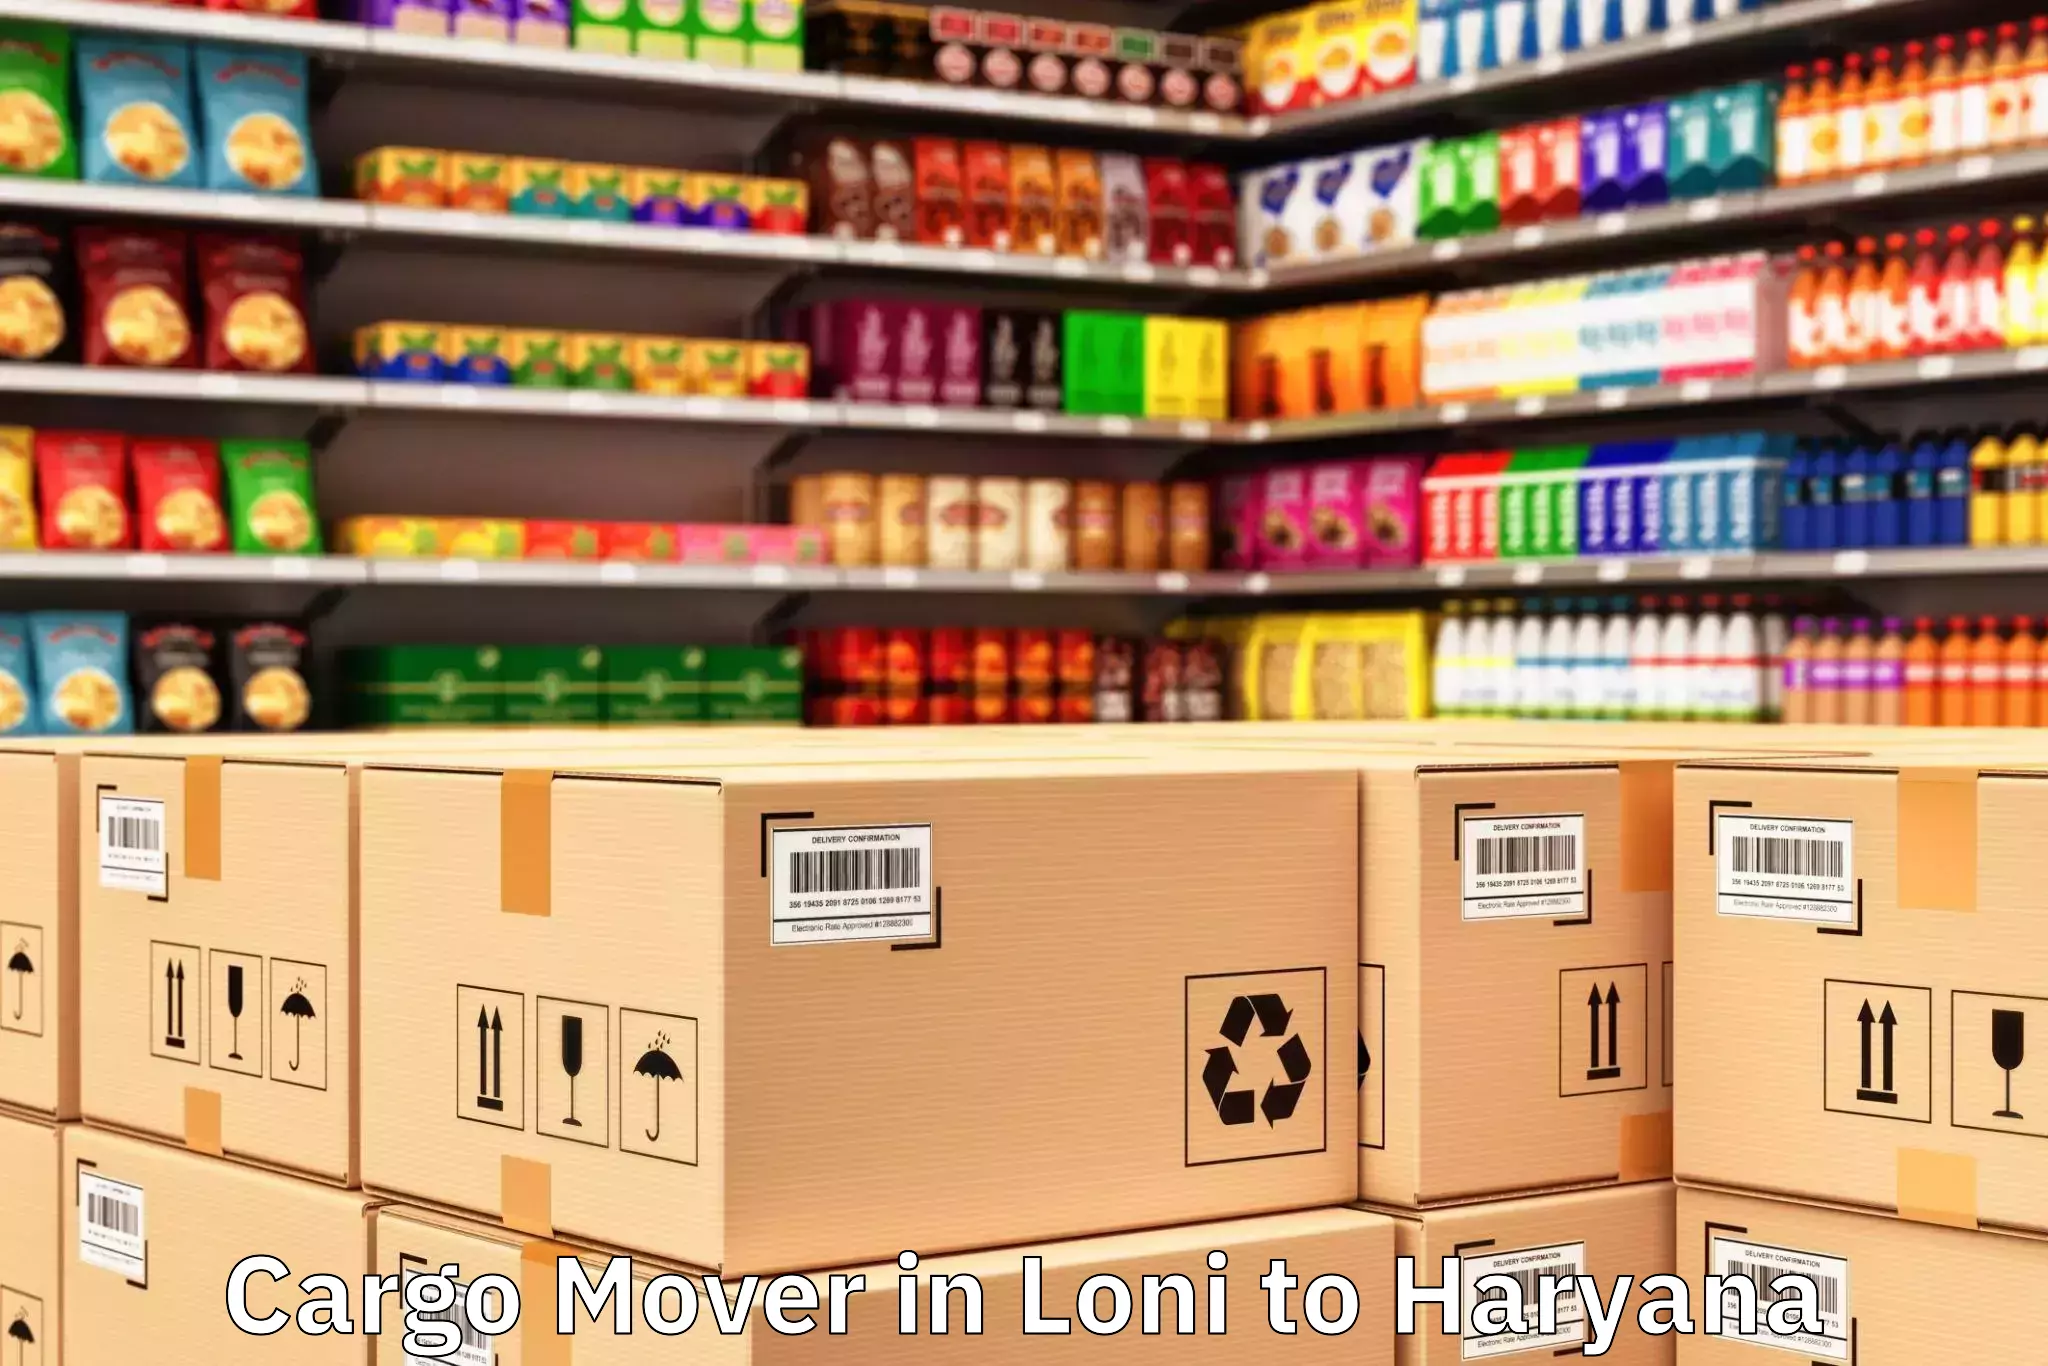 Top Loni to Crown Interiorz Mall Cargo Mover Available